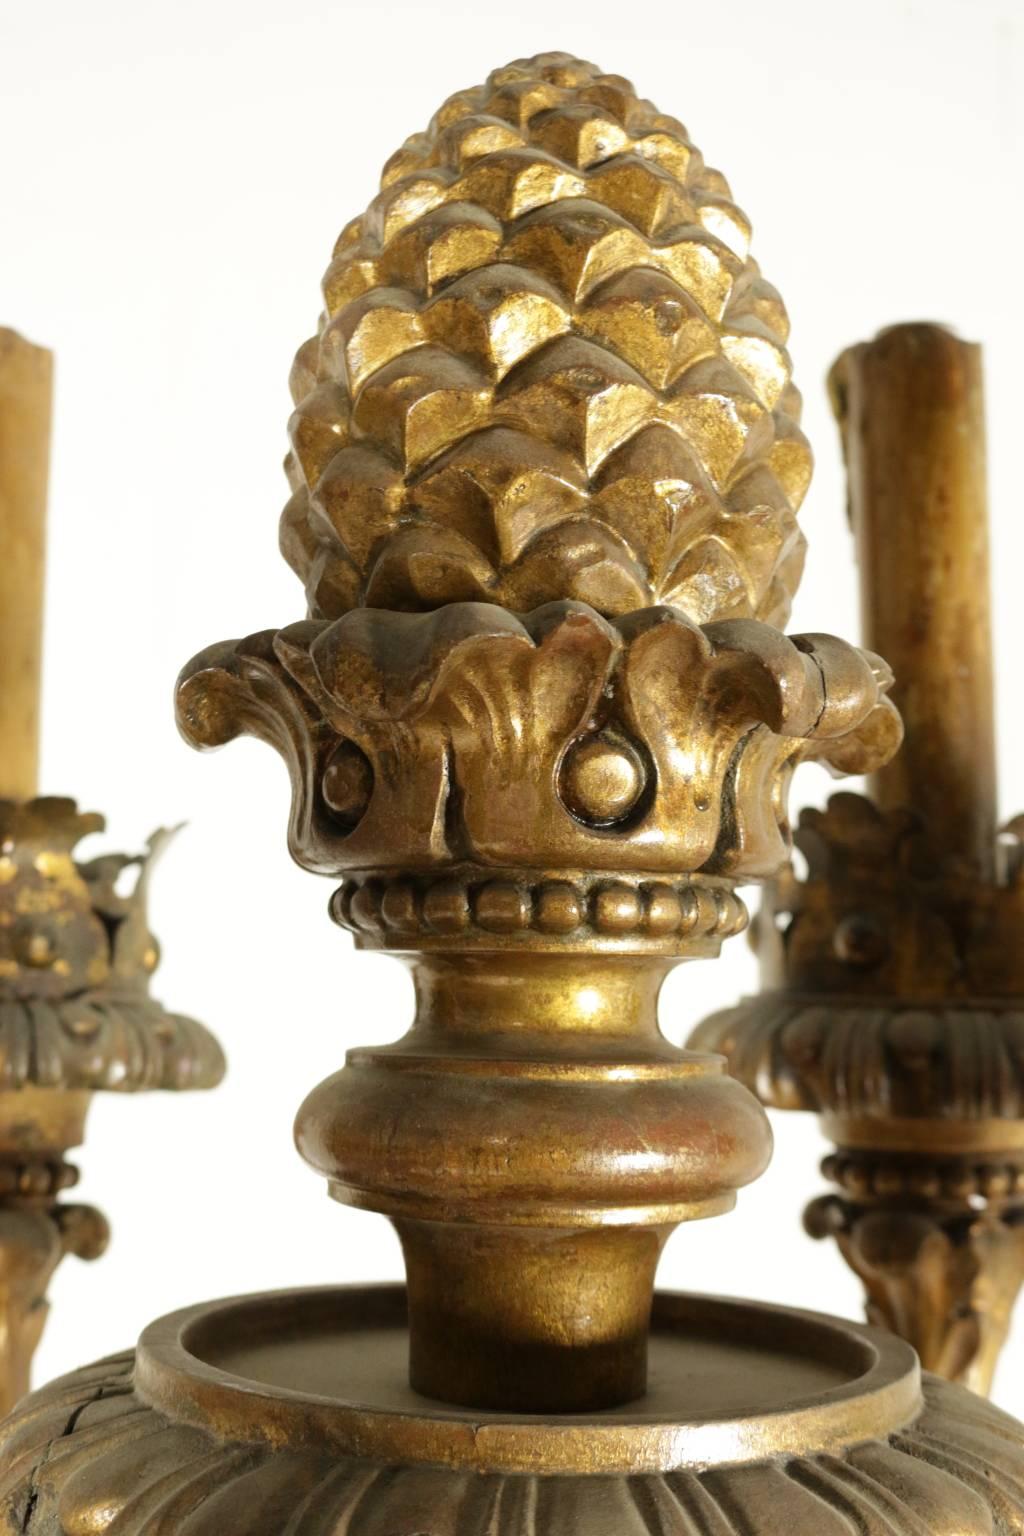 19th Century Large Carved and Gilded Wooden Torch Holder, Italy, Late 19th-Early 20th Century